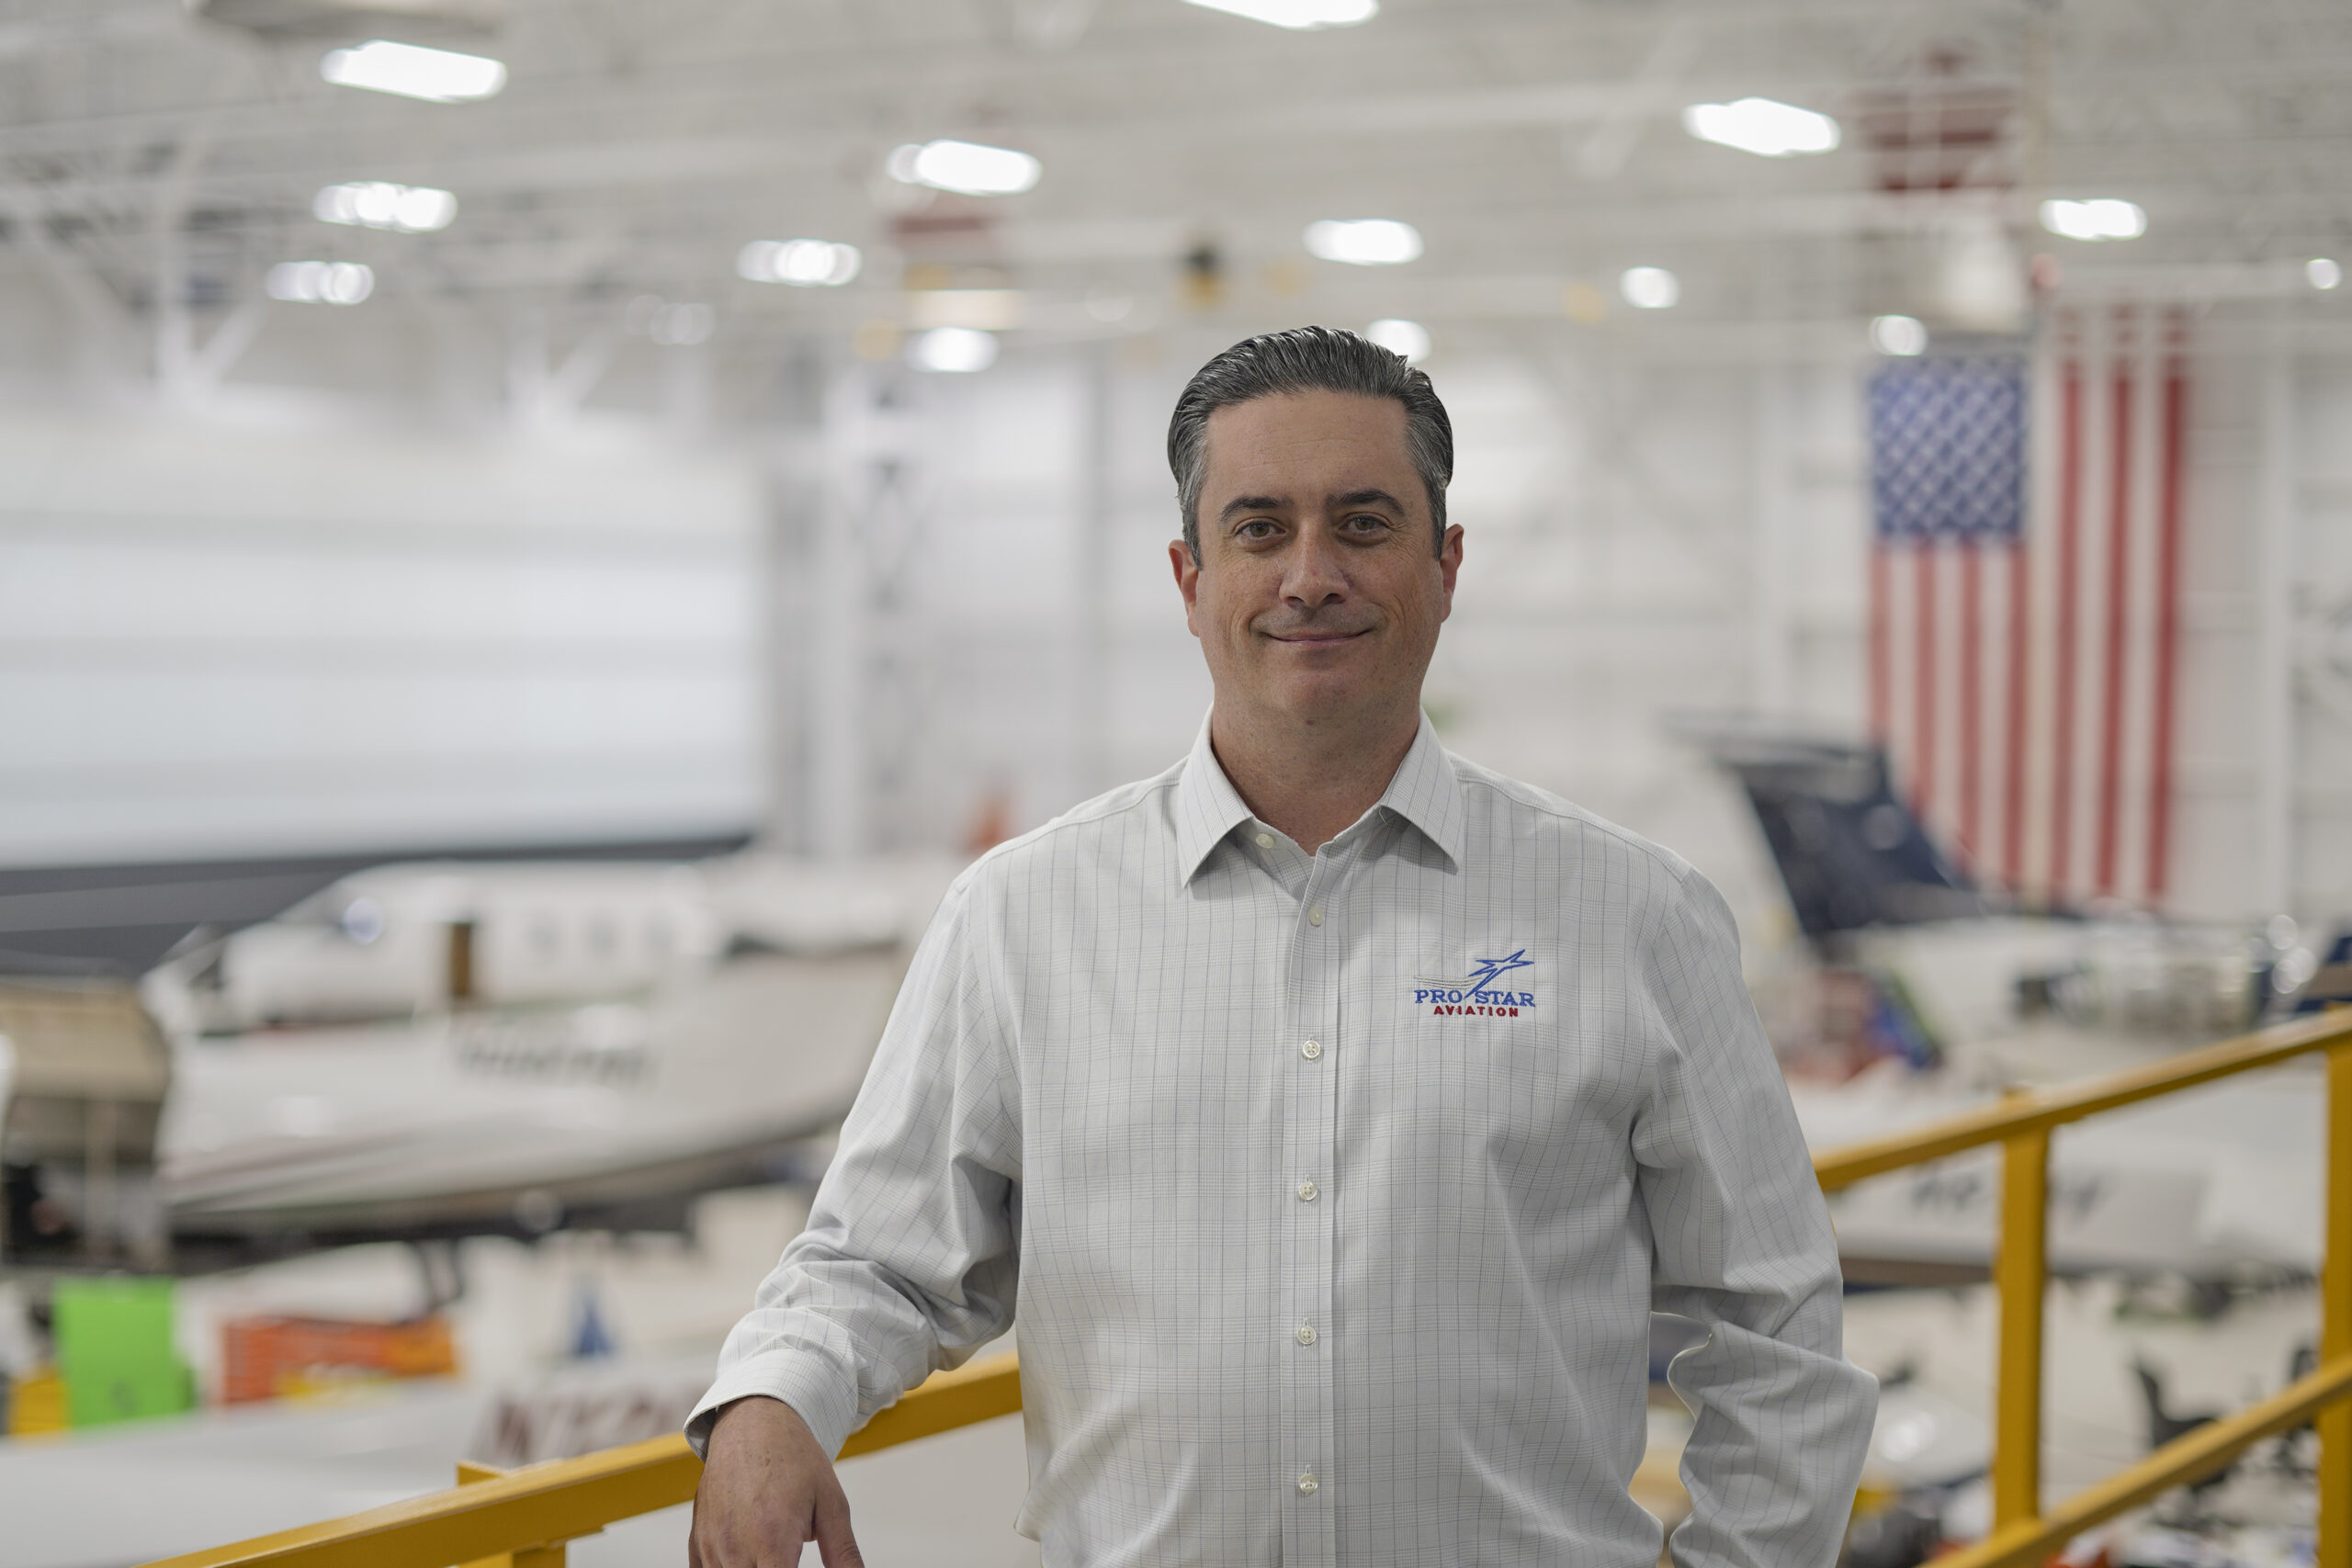 Pro Star Aviation Announces Promotion of Gerry Latour to Program Sales Manager